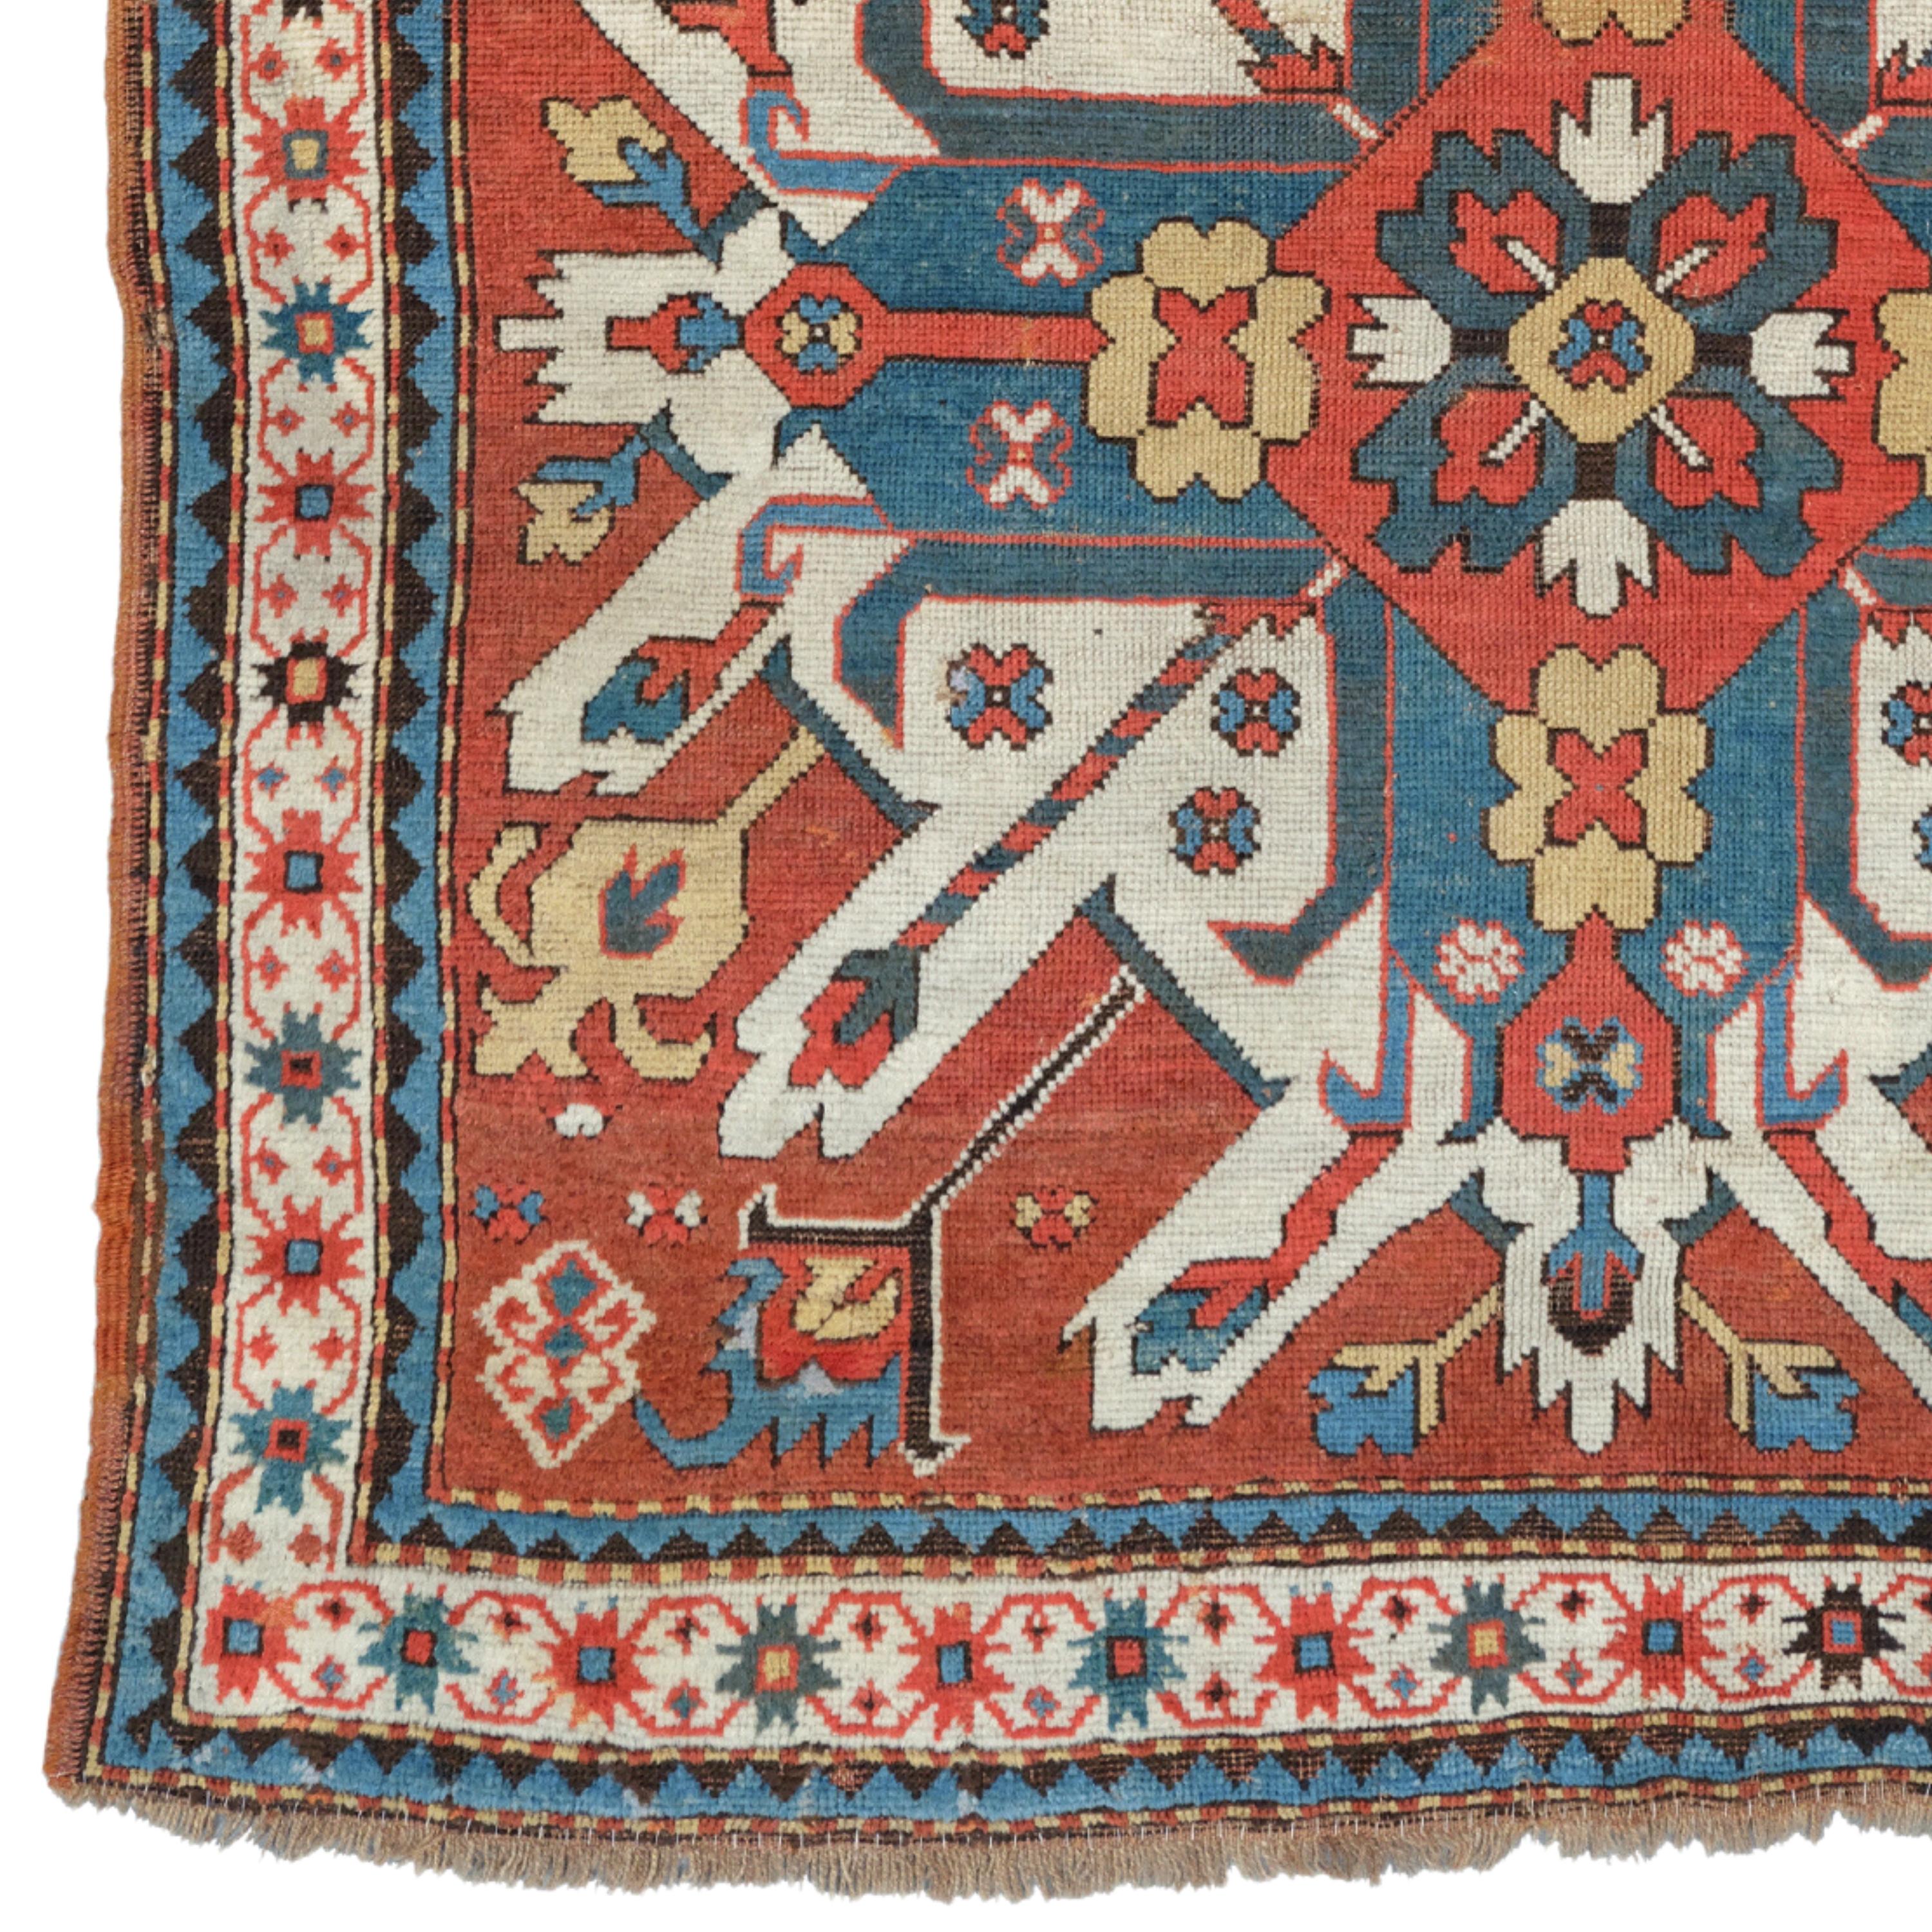 19th Century Eagle Kazak Rug
Size: 133x250 cm

This impressive 19th century Eagle Kazar Rug is a masterpiece reflecting the elegant and sophisticated craftsmanship of a historic period.

Rich Patterns: The carpet is decorated with complex geometric